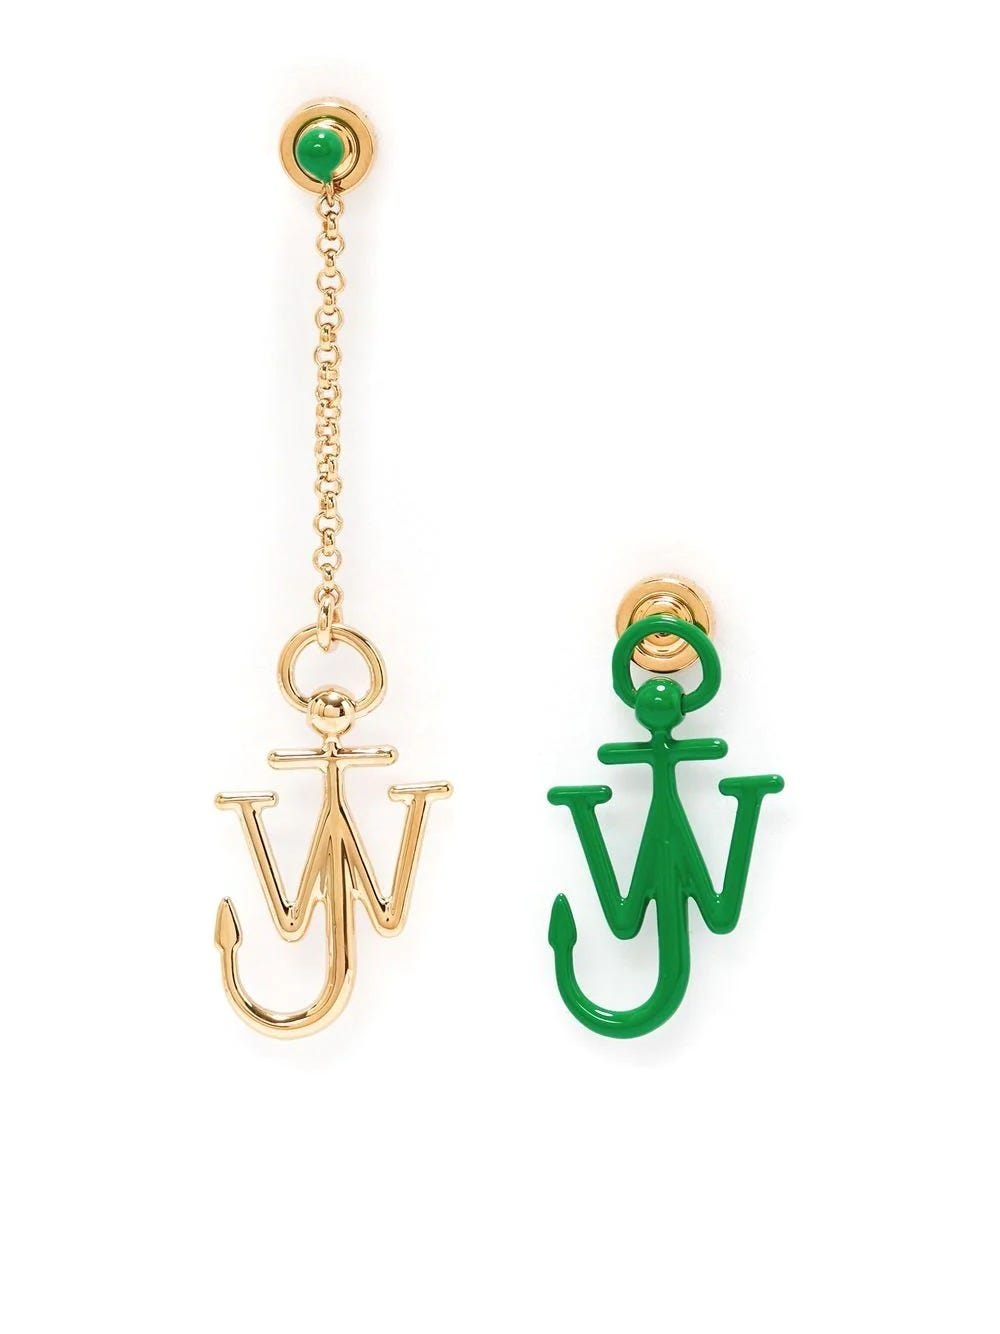 JW ANDERSON GOLD AND GREEN ASYMMETRICAL ANCHOR EARRINGS